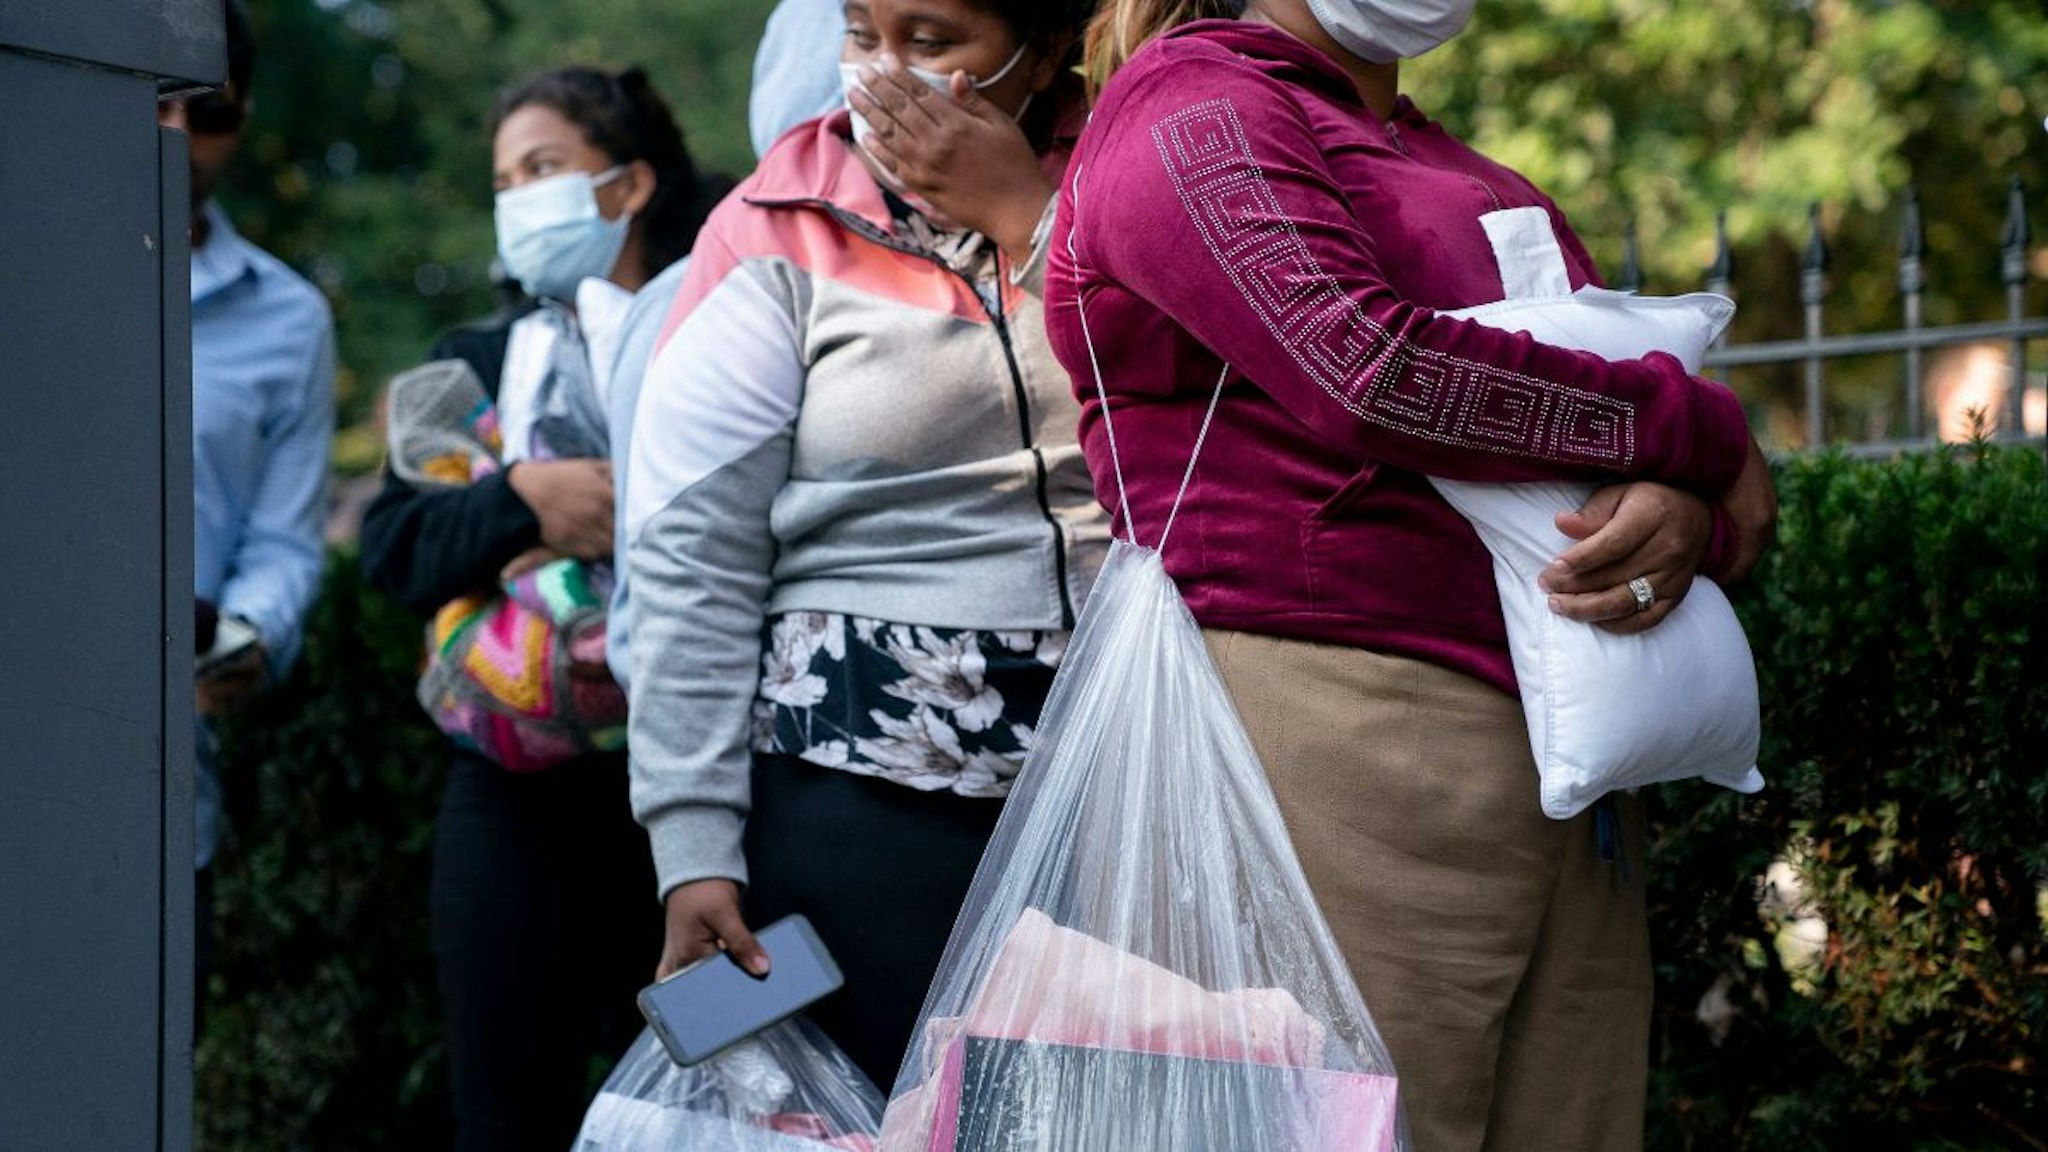 Migrants from Venezuela, who boarded a bus in Texas, wait to be transported to a local church by volunteers after being dropped off outside the residence of US Vice President Kamala Harris, at the Naval Observatory in Washington, DC, on September 15, 2022.